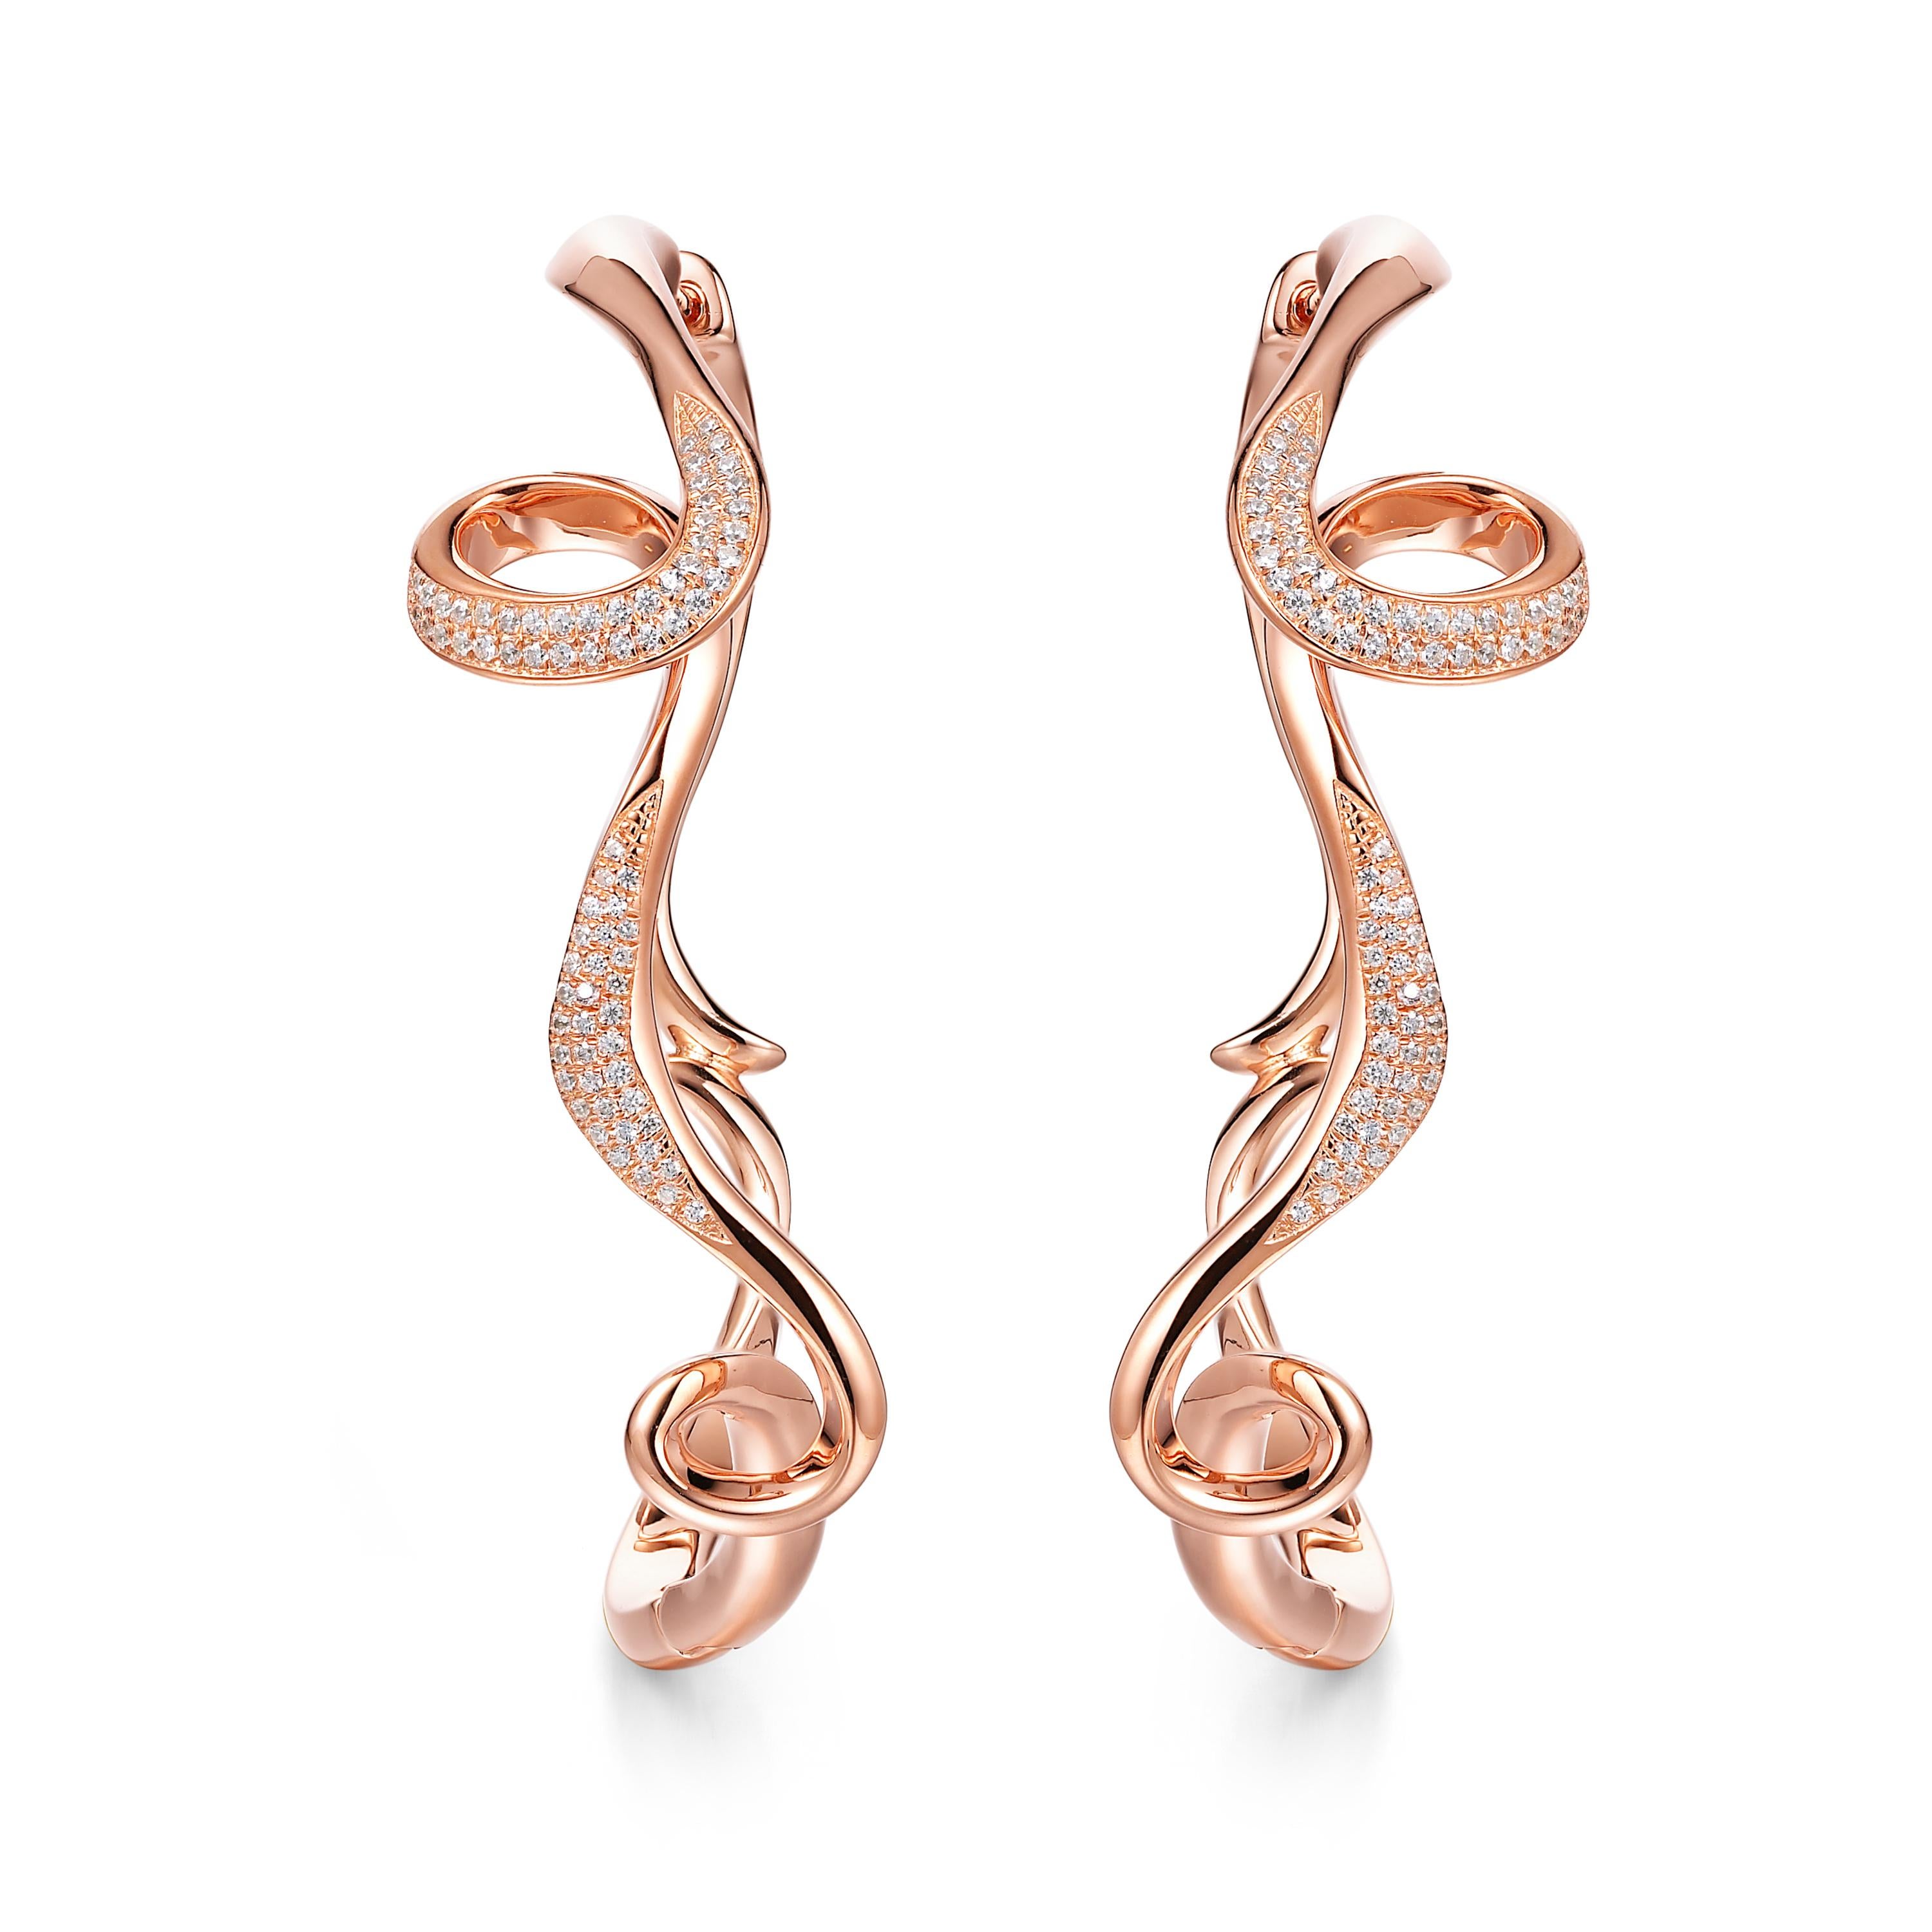 Description:
Serenity large hoop earrings shimmering with Hearts and Arrows* cubic zirconia set in 18ct rose gold plated on sterling silver.

*Hearts and Arrows refer to the diamond cut quality. Our cubic zirconia is cut with 28 extra facets to give